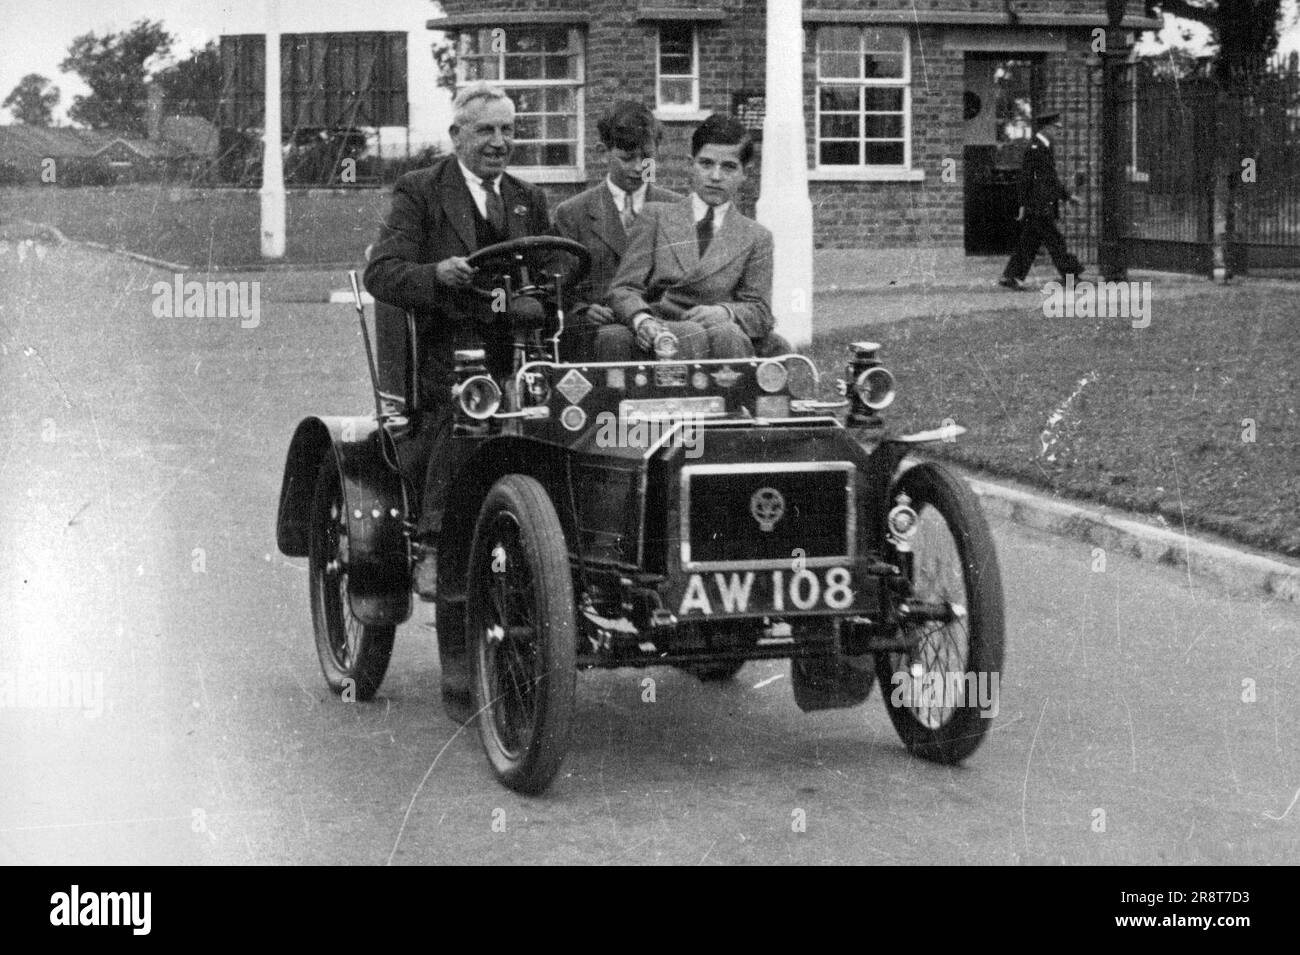 Prince Edward Rides in a Veteran - Prince Edward (centre) with Count Soerring enjoy a ride in a 1903 Humber car, driven by Mr. Sam Wright, Keeper of the Museum. Prince Edward, Duke of Kent with his young friend Count Hans Veit Zu Soerring, were interested visitors to the Motor Museum at Coventry, England, leading centre of the British motor industry. August 14, 1949. (Photo by Sport & General Press Agency, Limited). Stock Photo